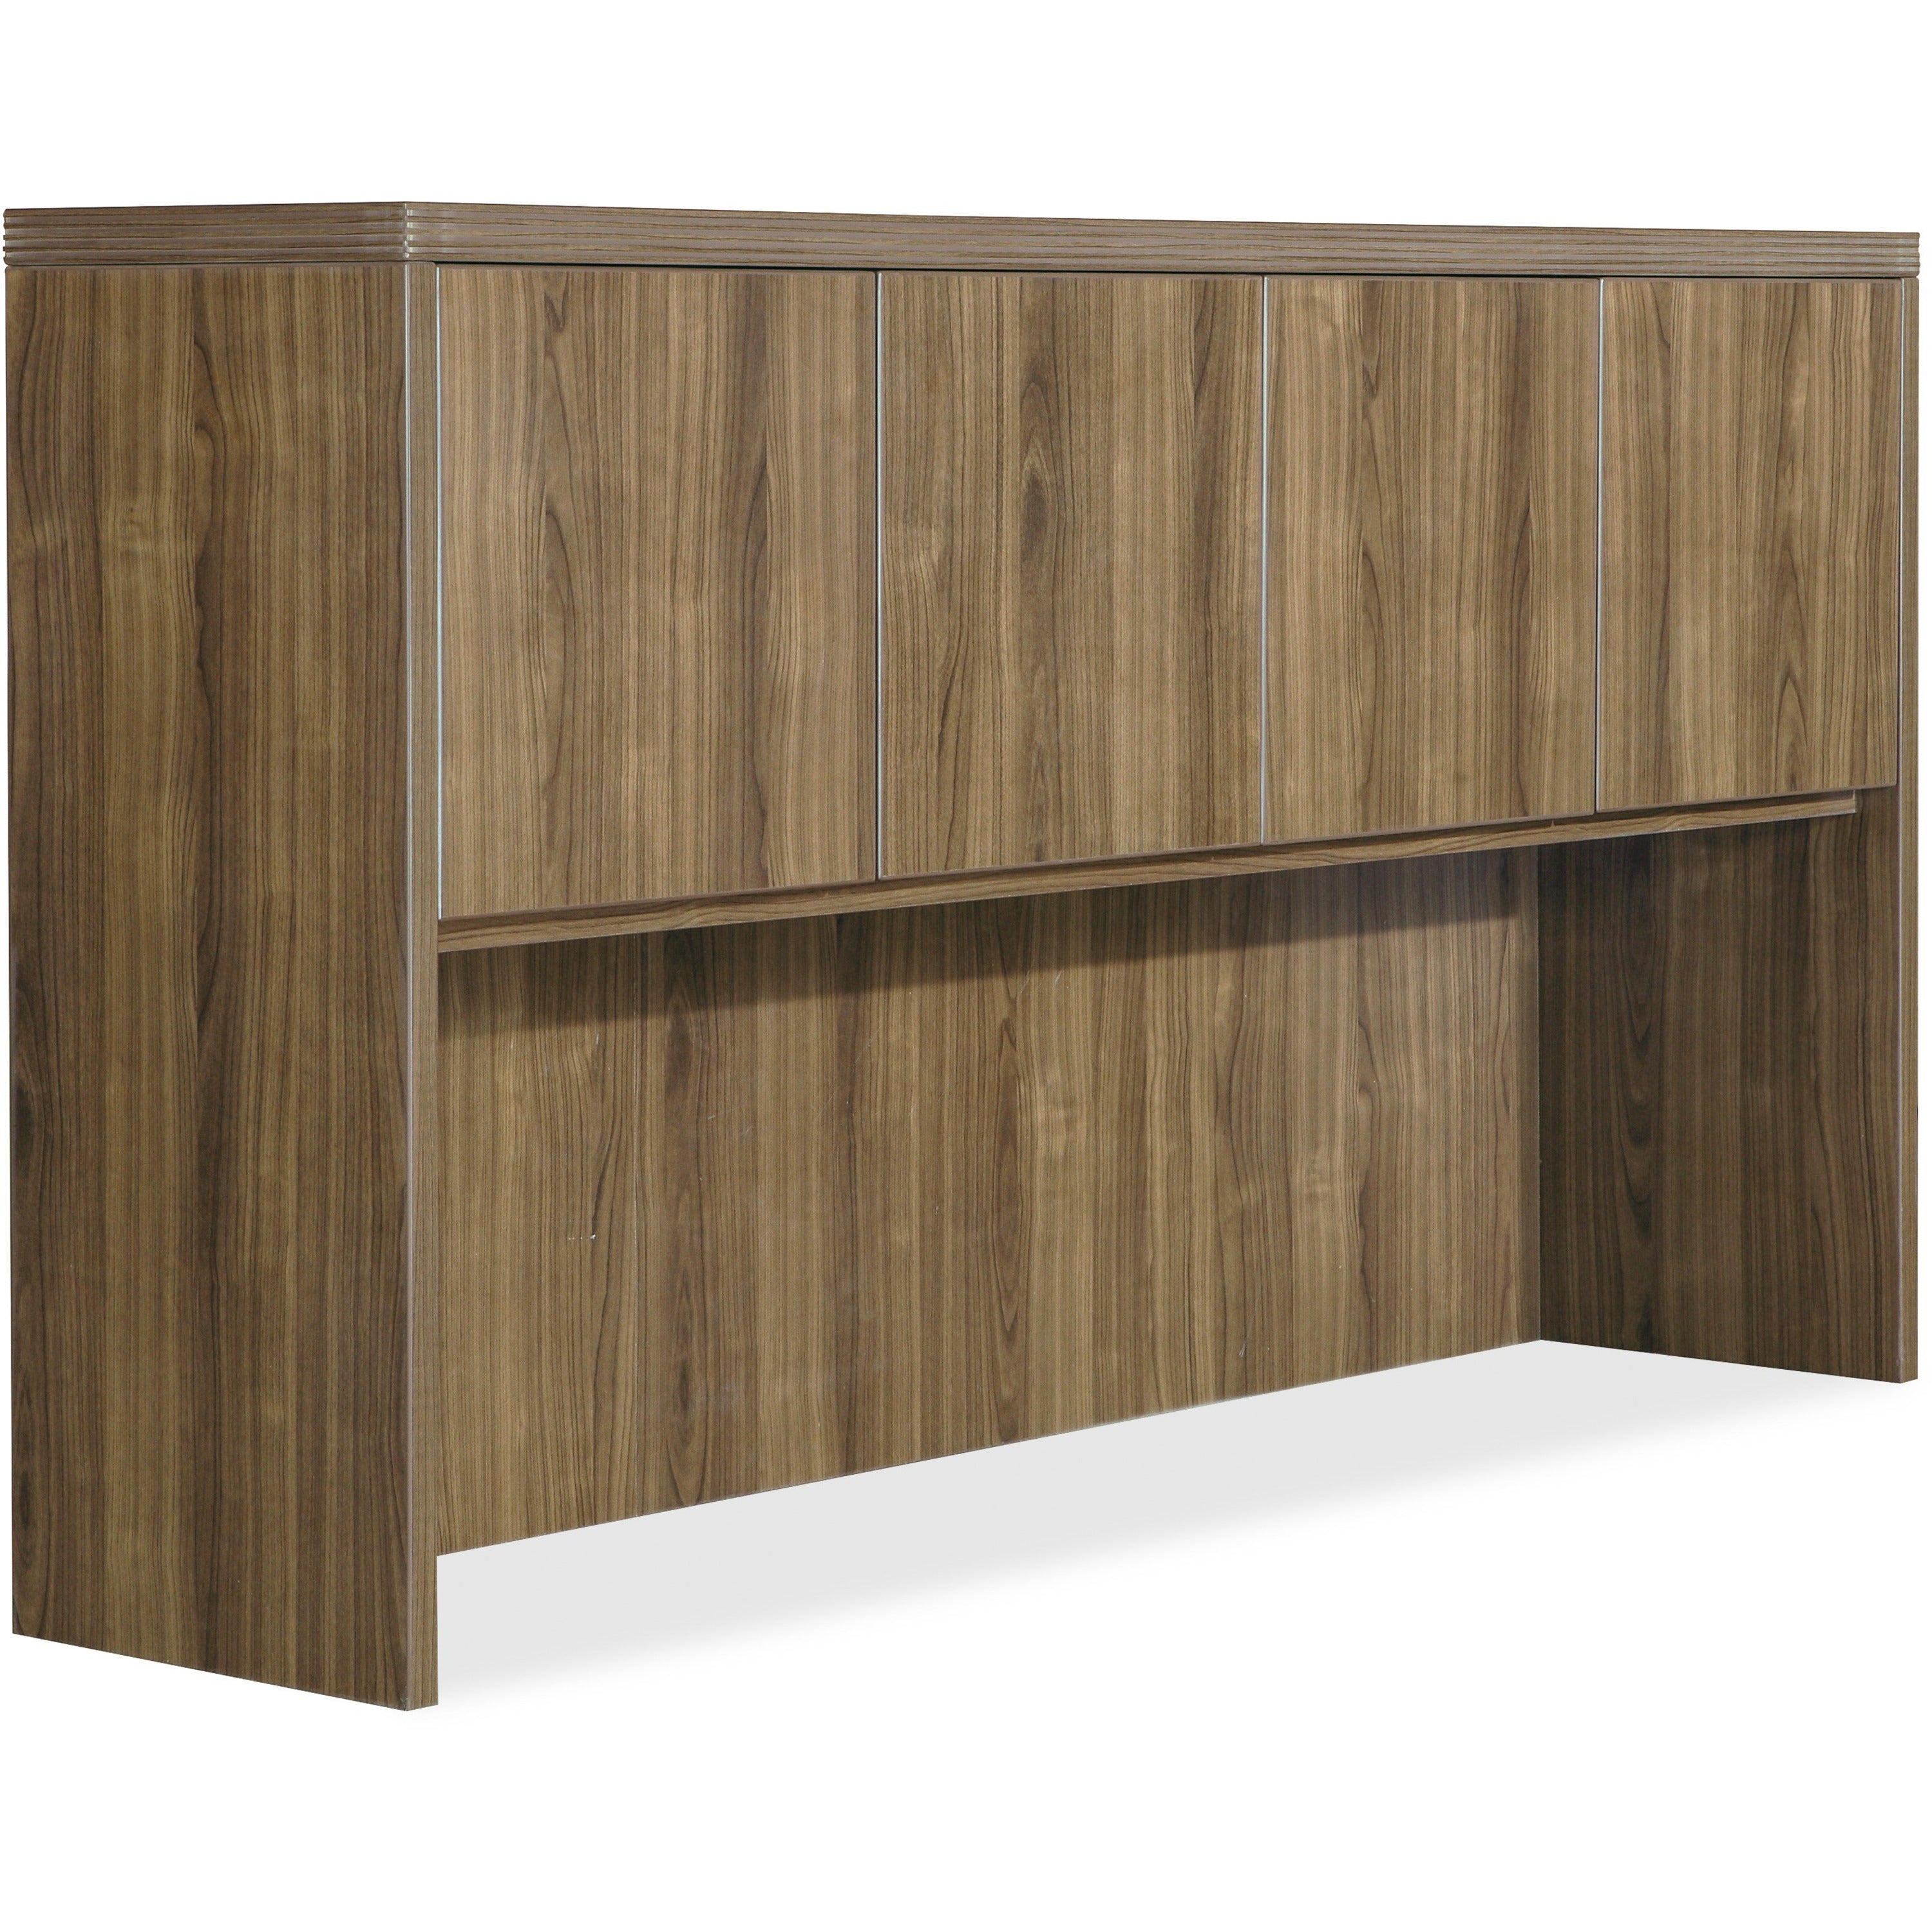 Lorell Chateau Series Hutch - 70.9" x 14.8"36.5" Hutch, 1.5" Top - 4 Door(s) - Reeded Edge - Material: P2 Particleboard - Finish: Walnut, Laminate - Durable - For Office - 